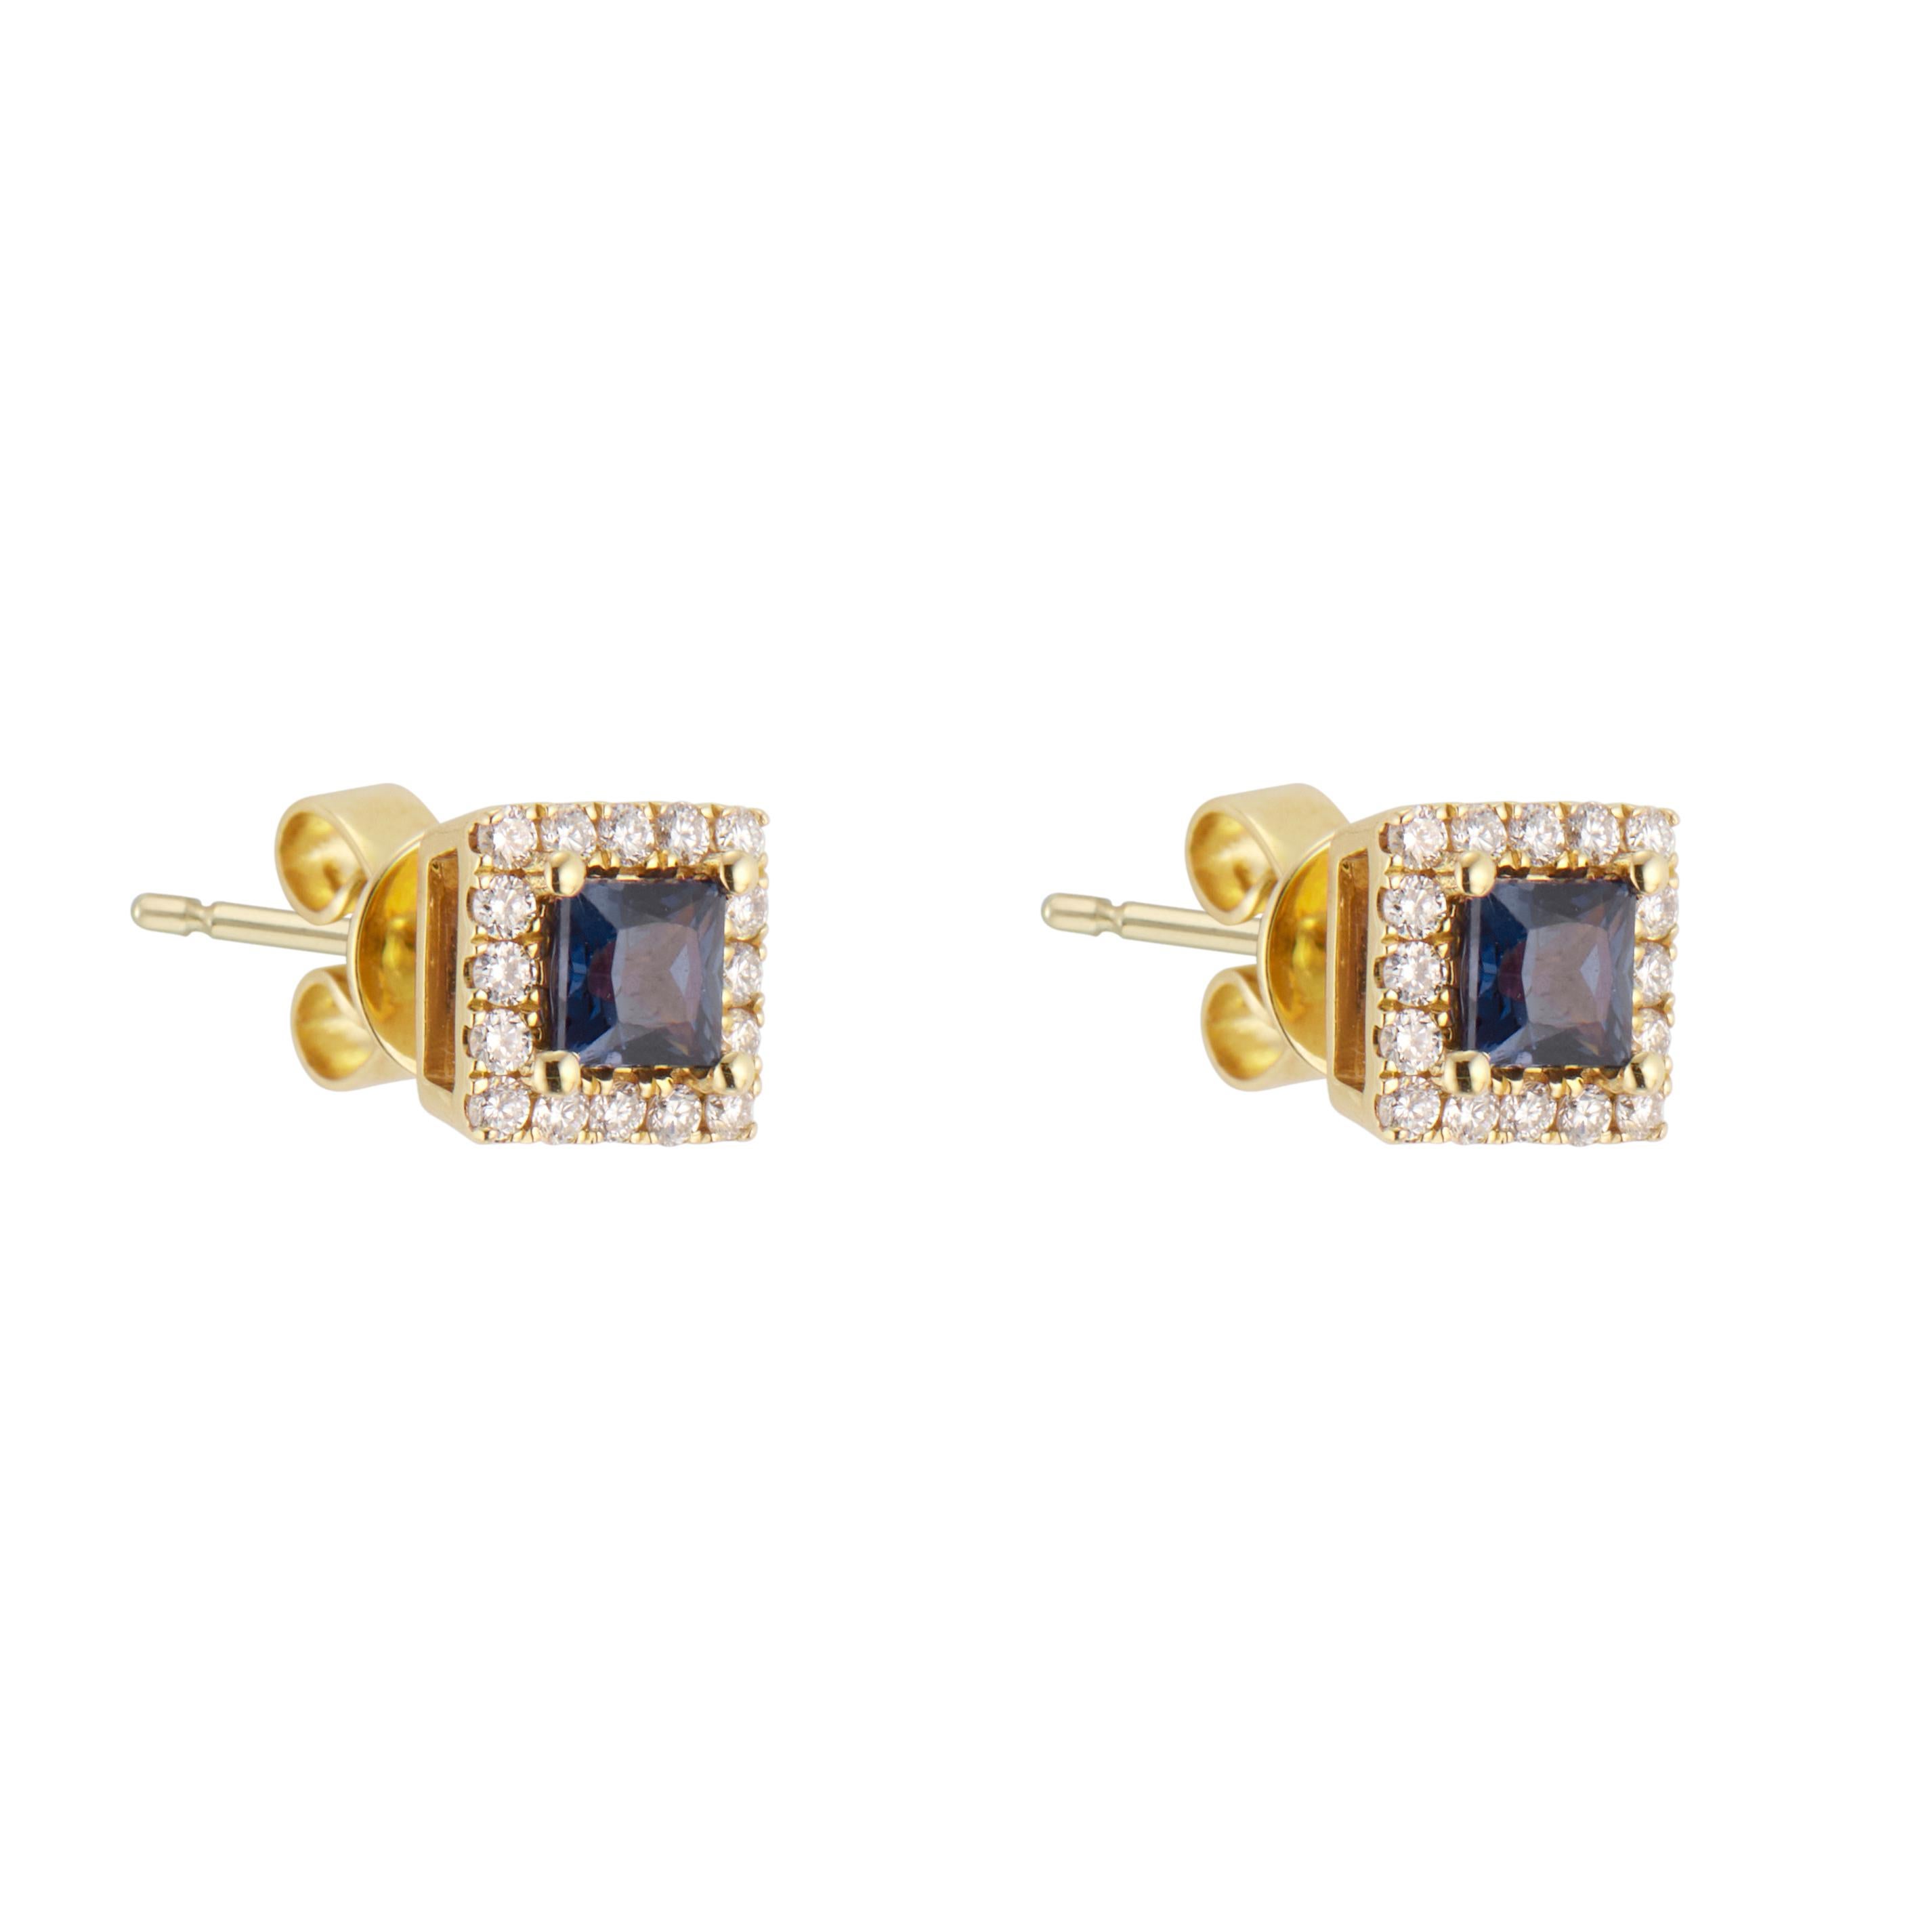 Sapphire and diamond stud earrings. 2 square cut sapphires, each with a halo of round brilliant cut diamonds, wet in 14k yellow gold. 

2 square blue sapphire, approx. .61cts
30 round brilliant cut diamonds, approx. .23cts
14k yellow gold 
Stamped: